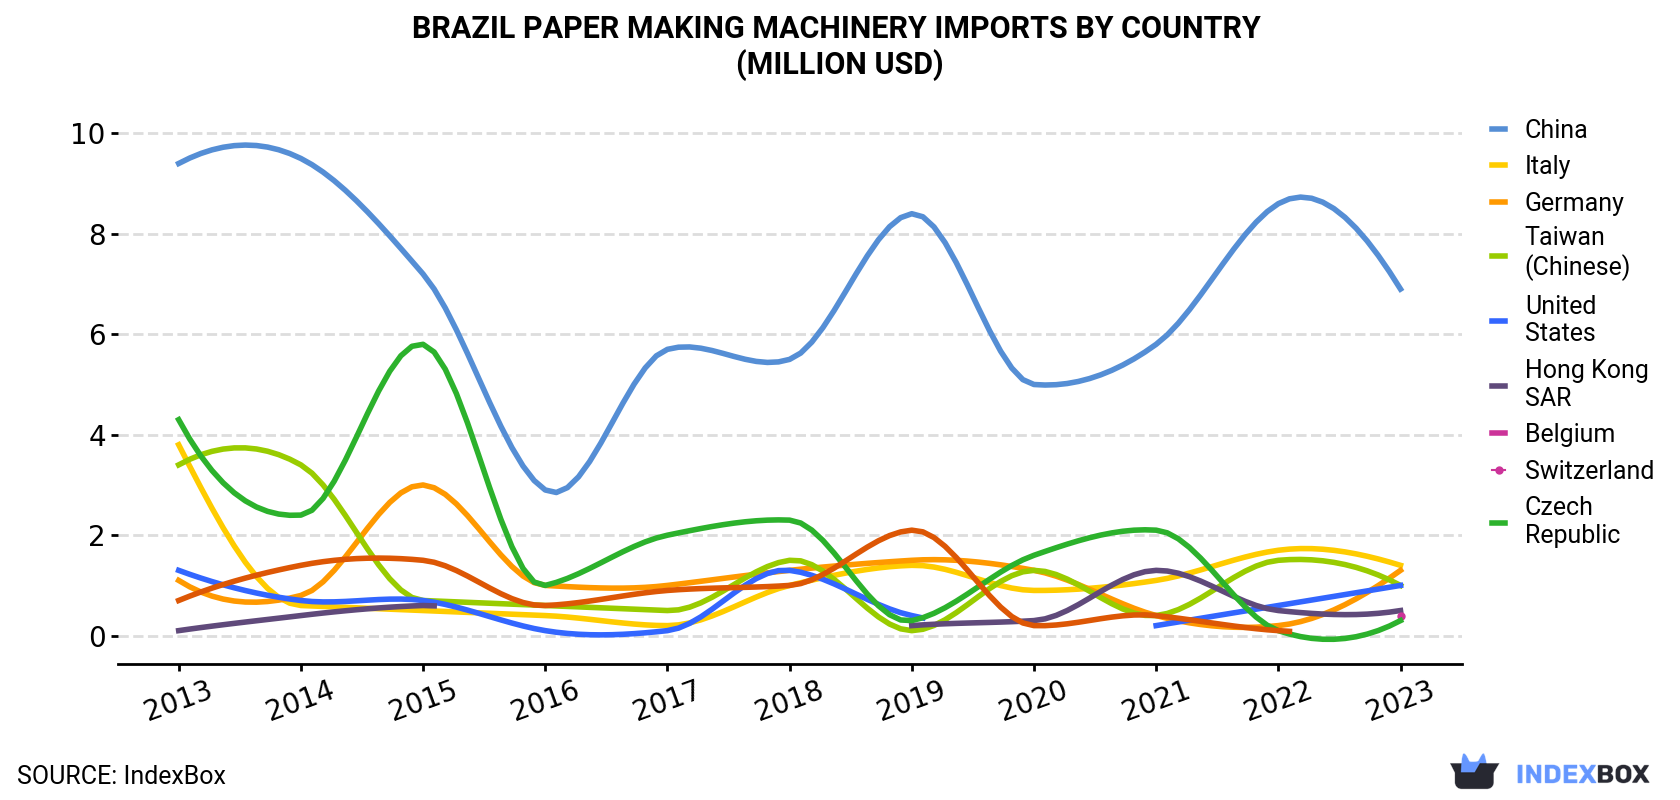 Brazil Paper Making Machinery Imports By Country (Million USD)